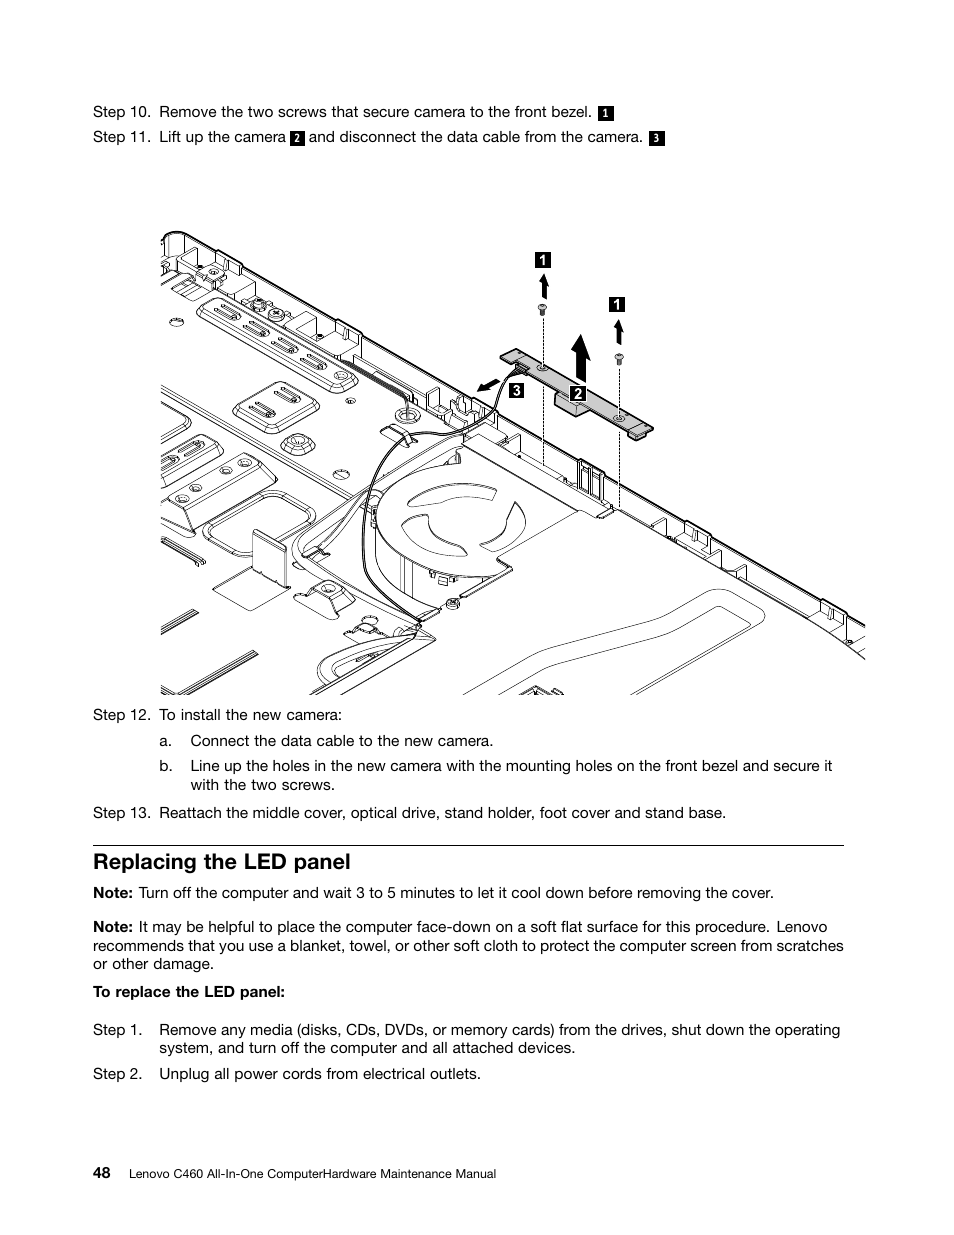 Replacing the led panel | Lenovo C460 All-in-One User Manual | Page 54 / 61